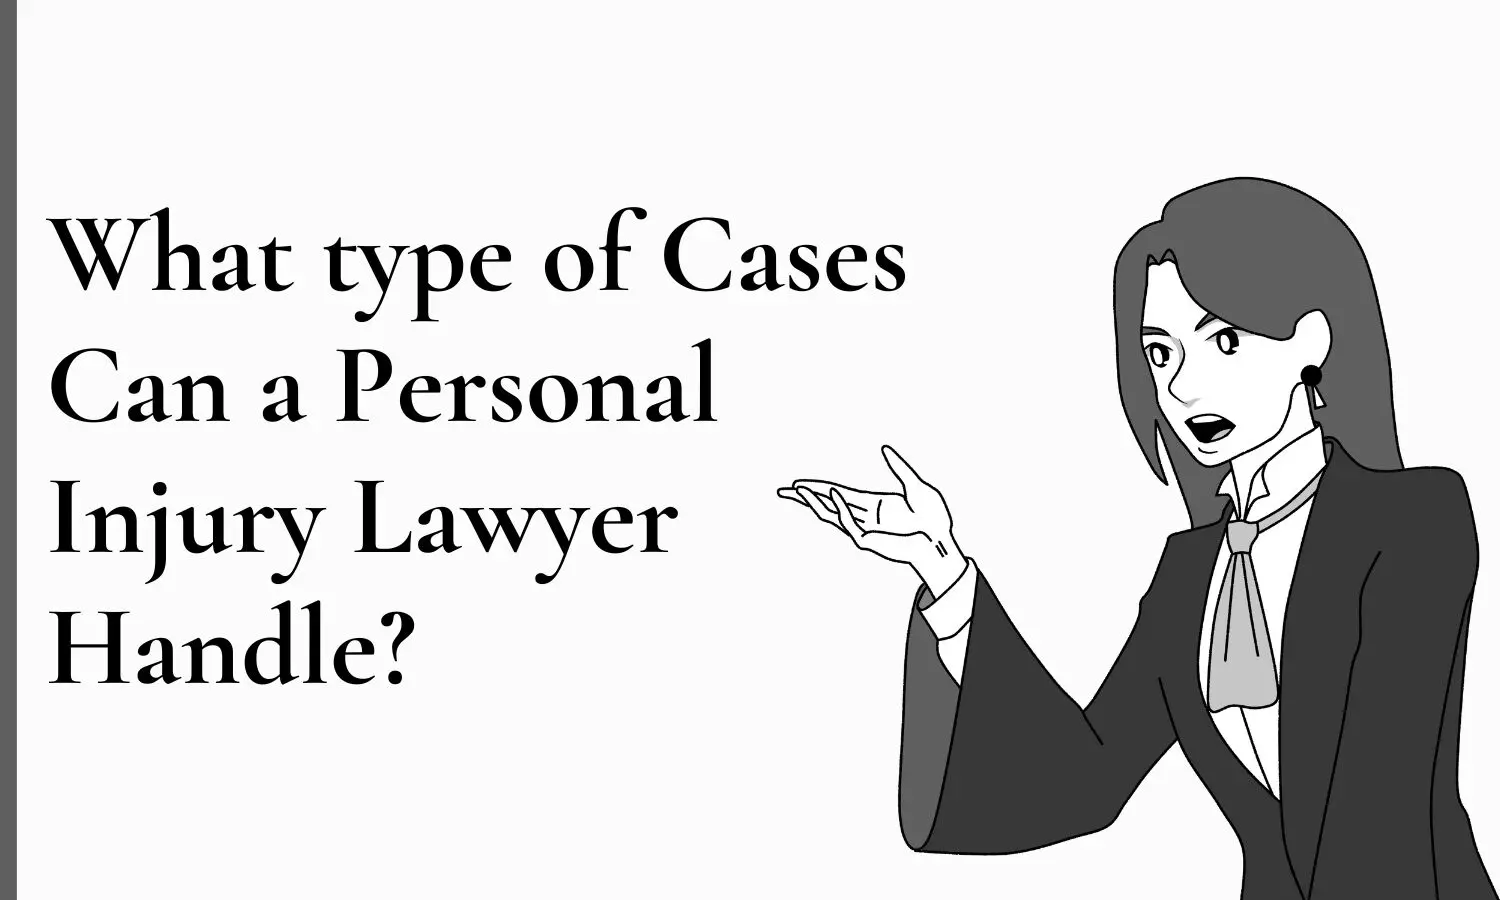 What type of Cases Can a Personal Injury Lawyer Handle?